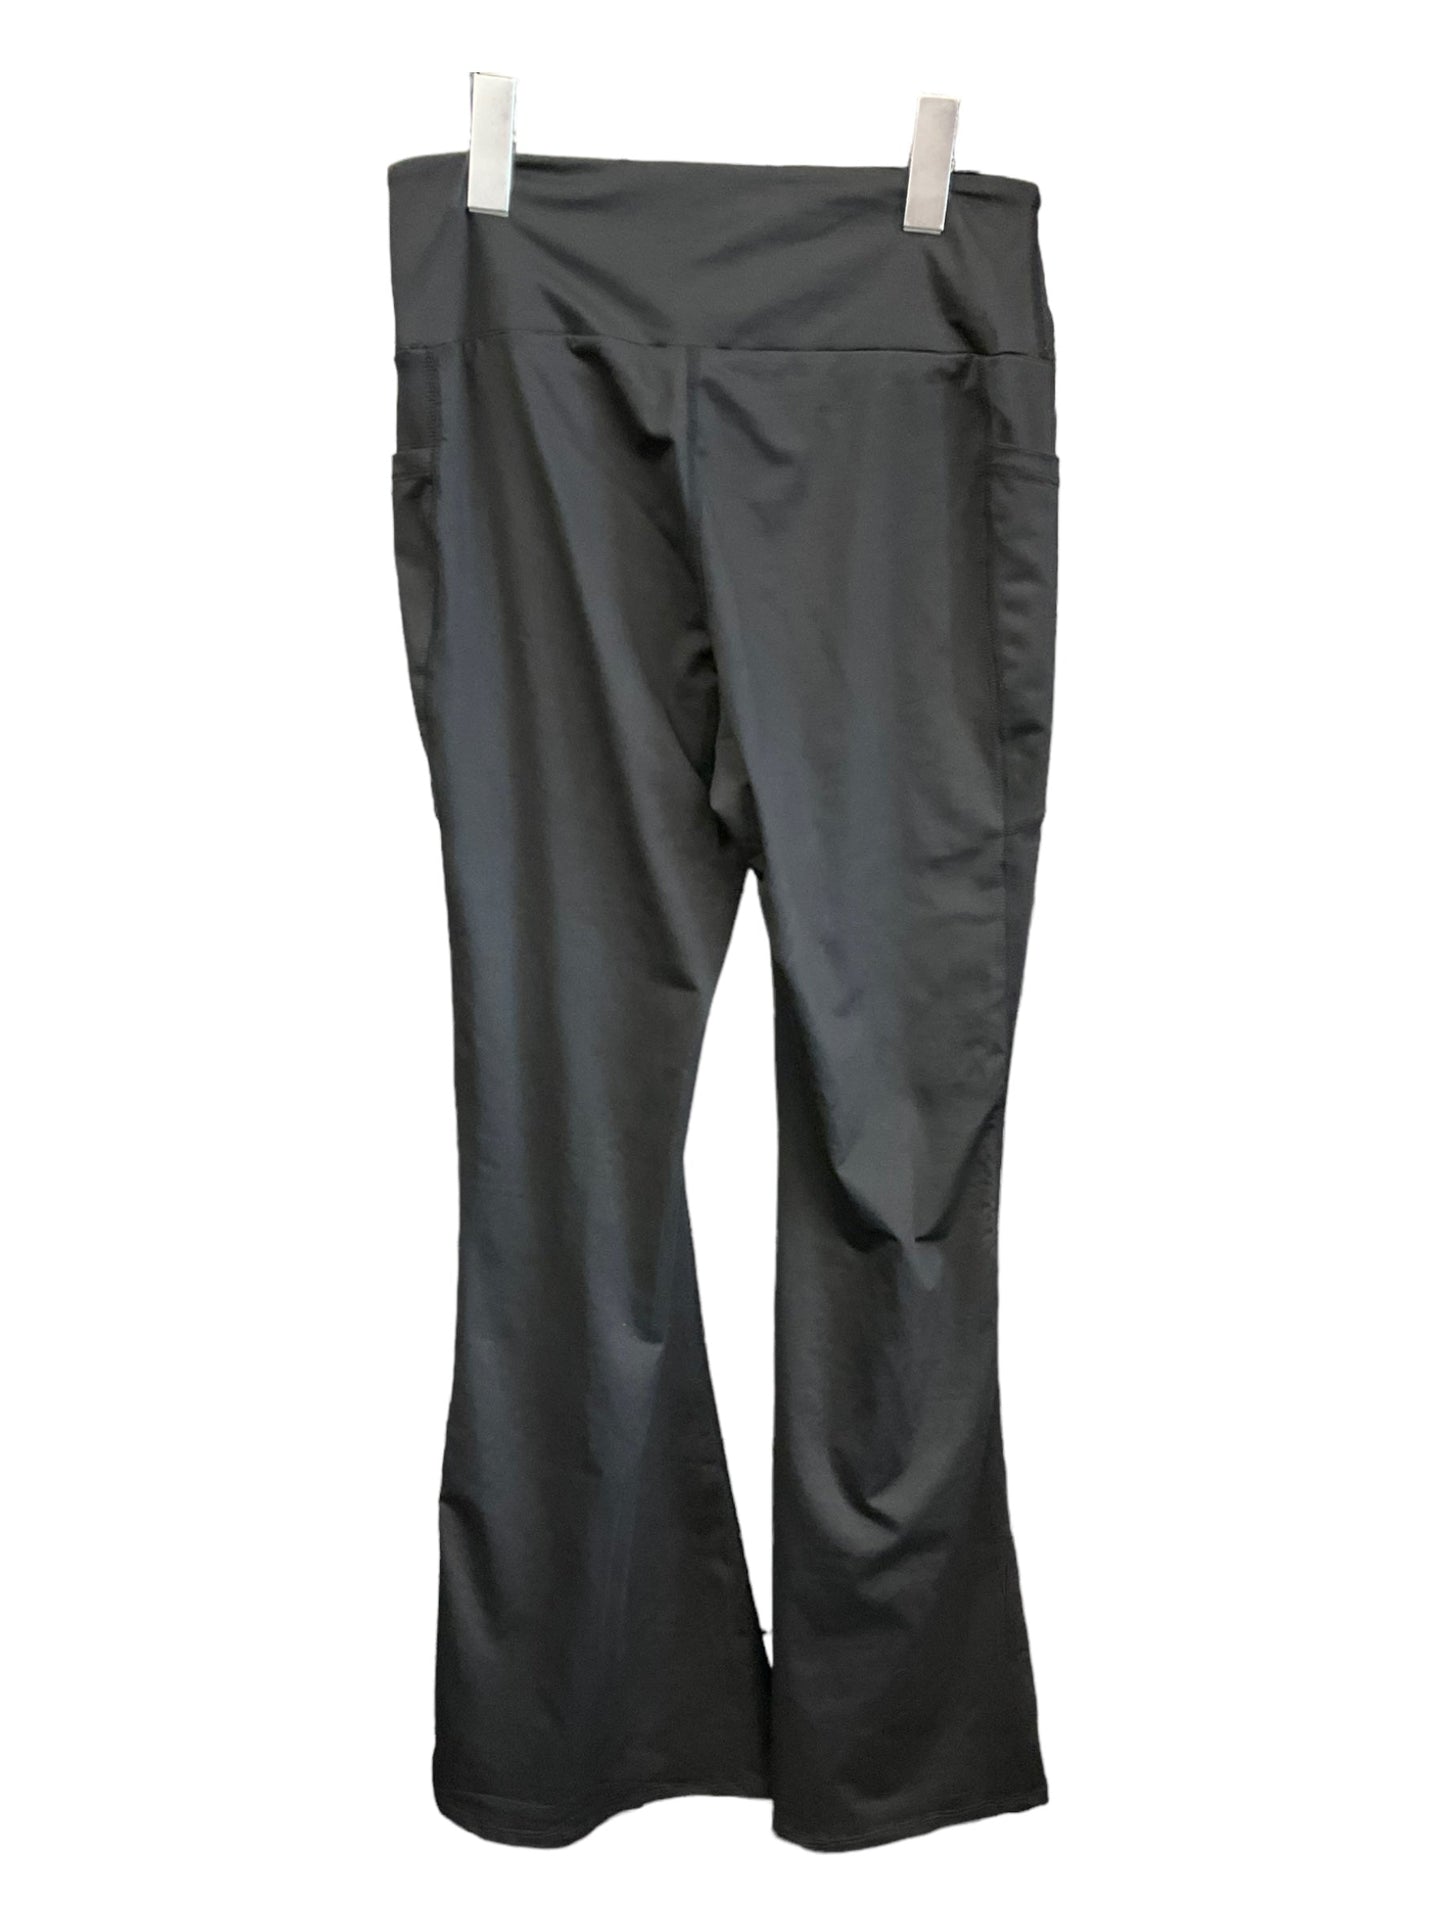 Athletic Pants By Shein  Size: L